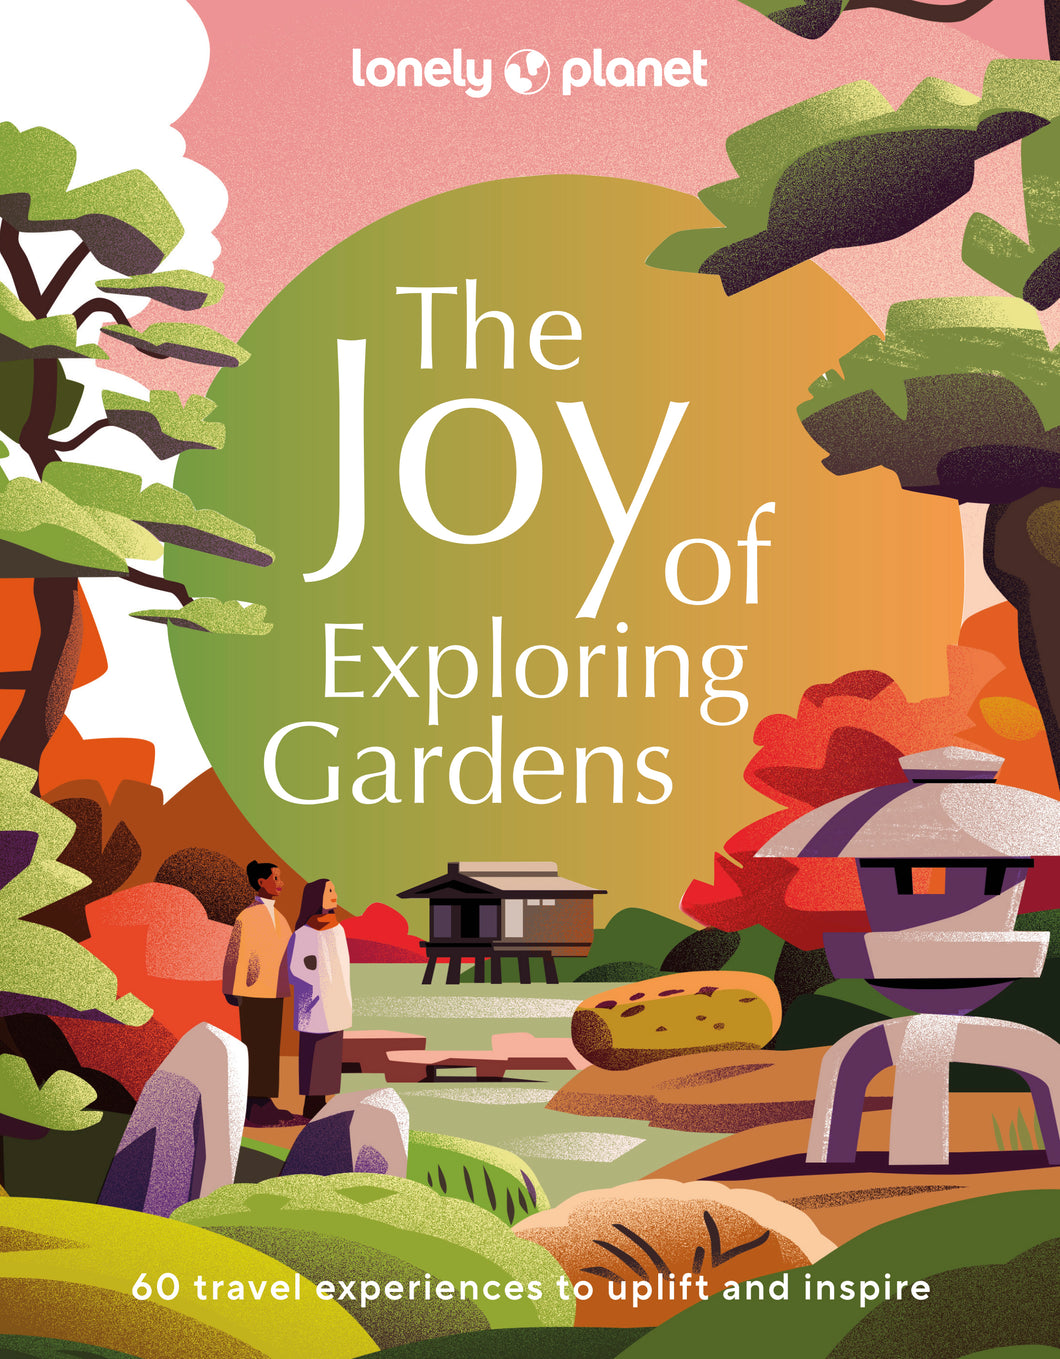 The Joy of Exploring Gardens by Lonely Planet